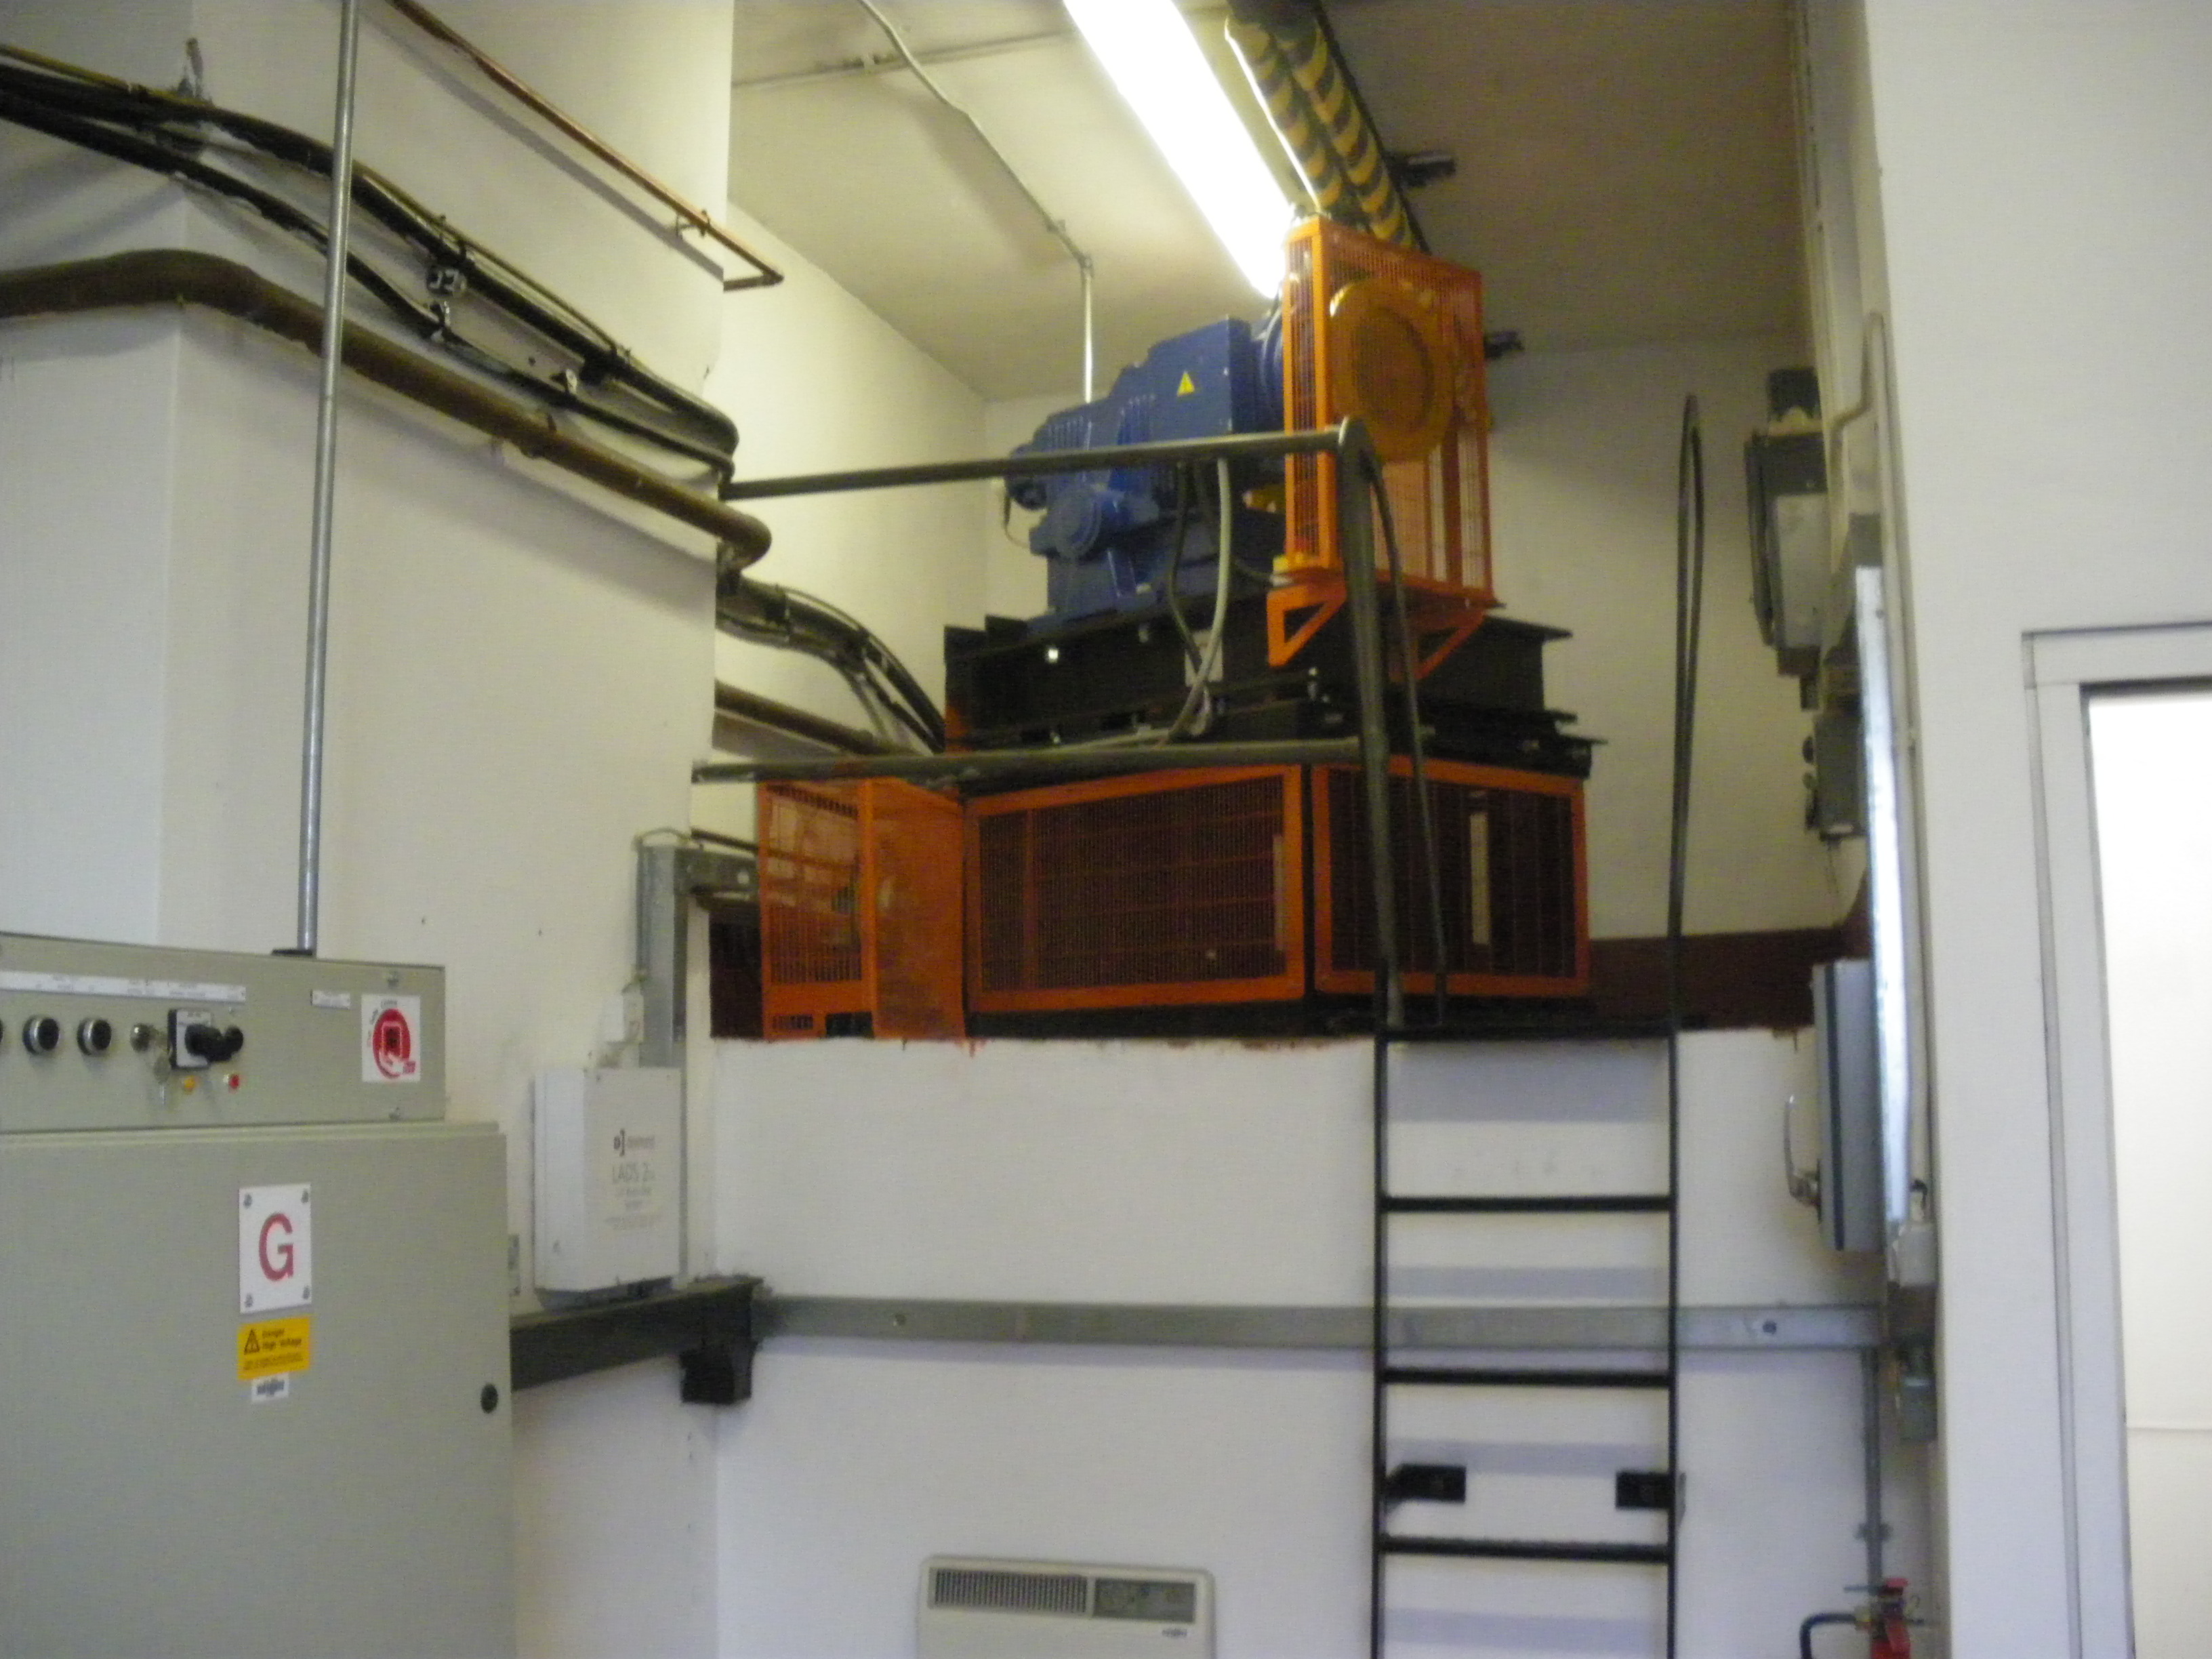 G lift motor room and machinery